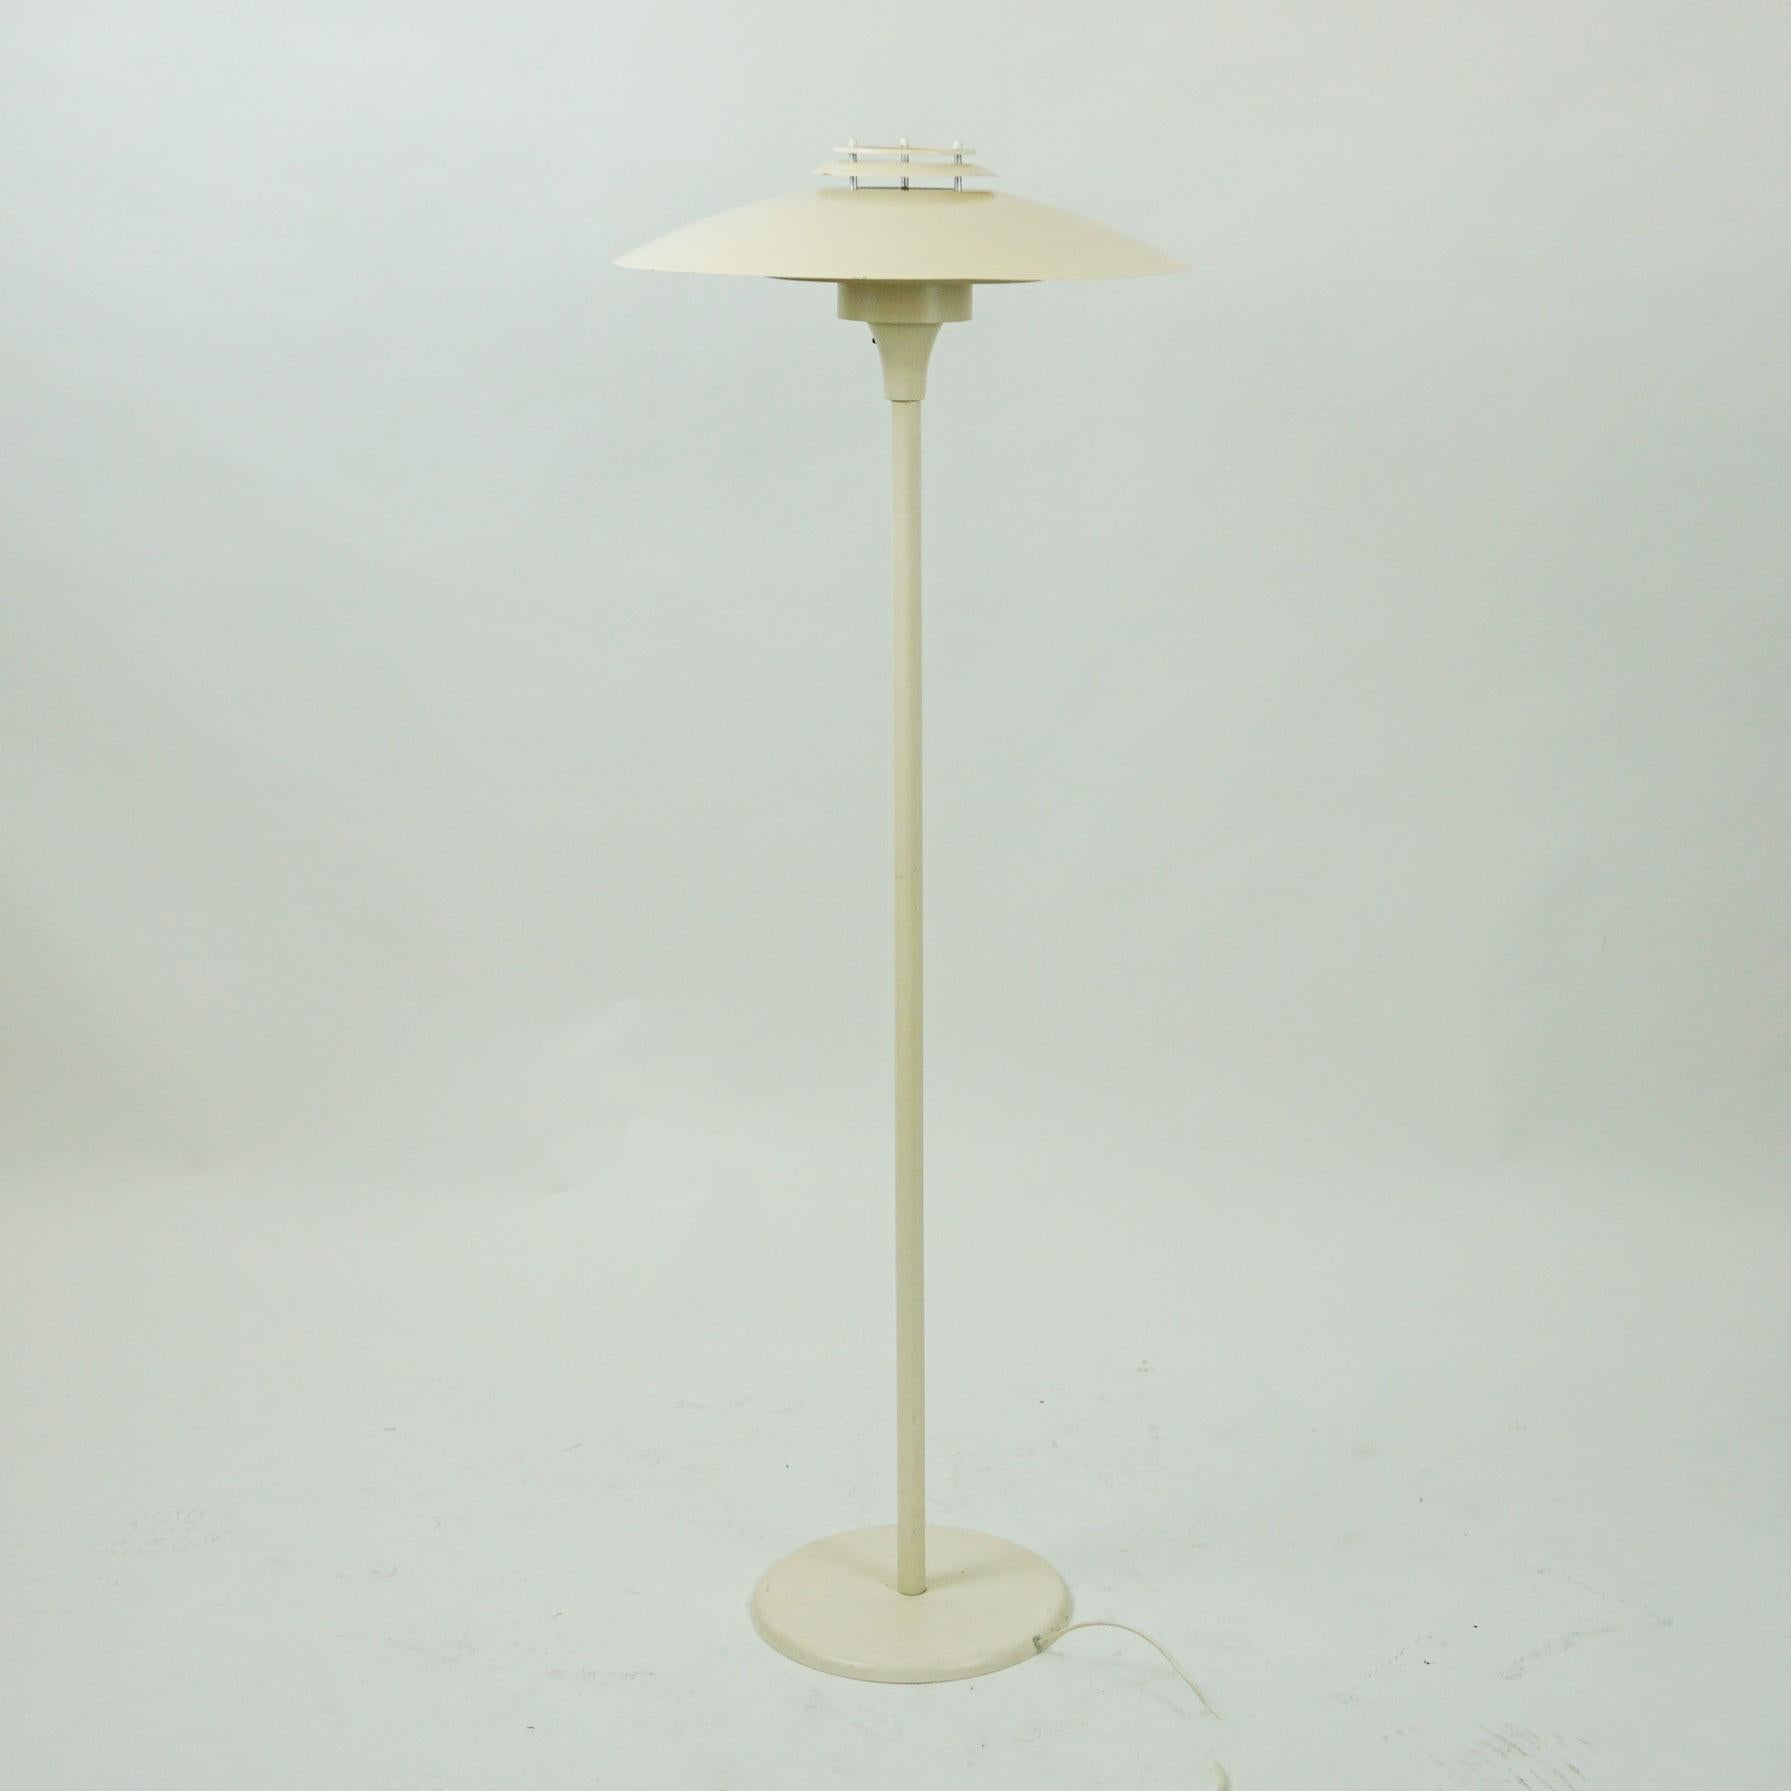 This charming Scandinavian floor lamp was produced by Lyfa Denmark in the 1960s. It features a Metal body and shade in a white lacquered finish.
The lamp provides 100 percent glare free light. Its design is based on the principle of a reflective